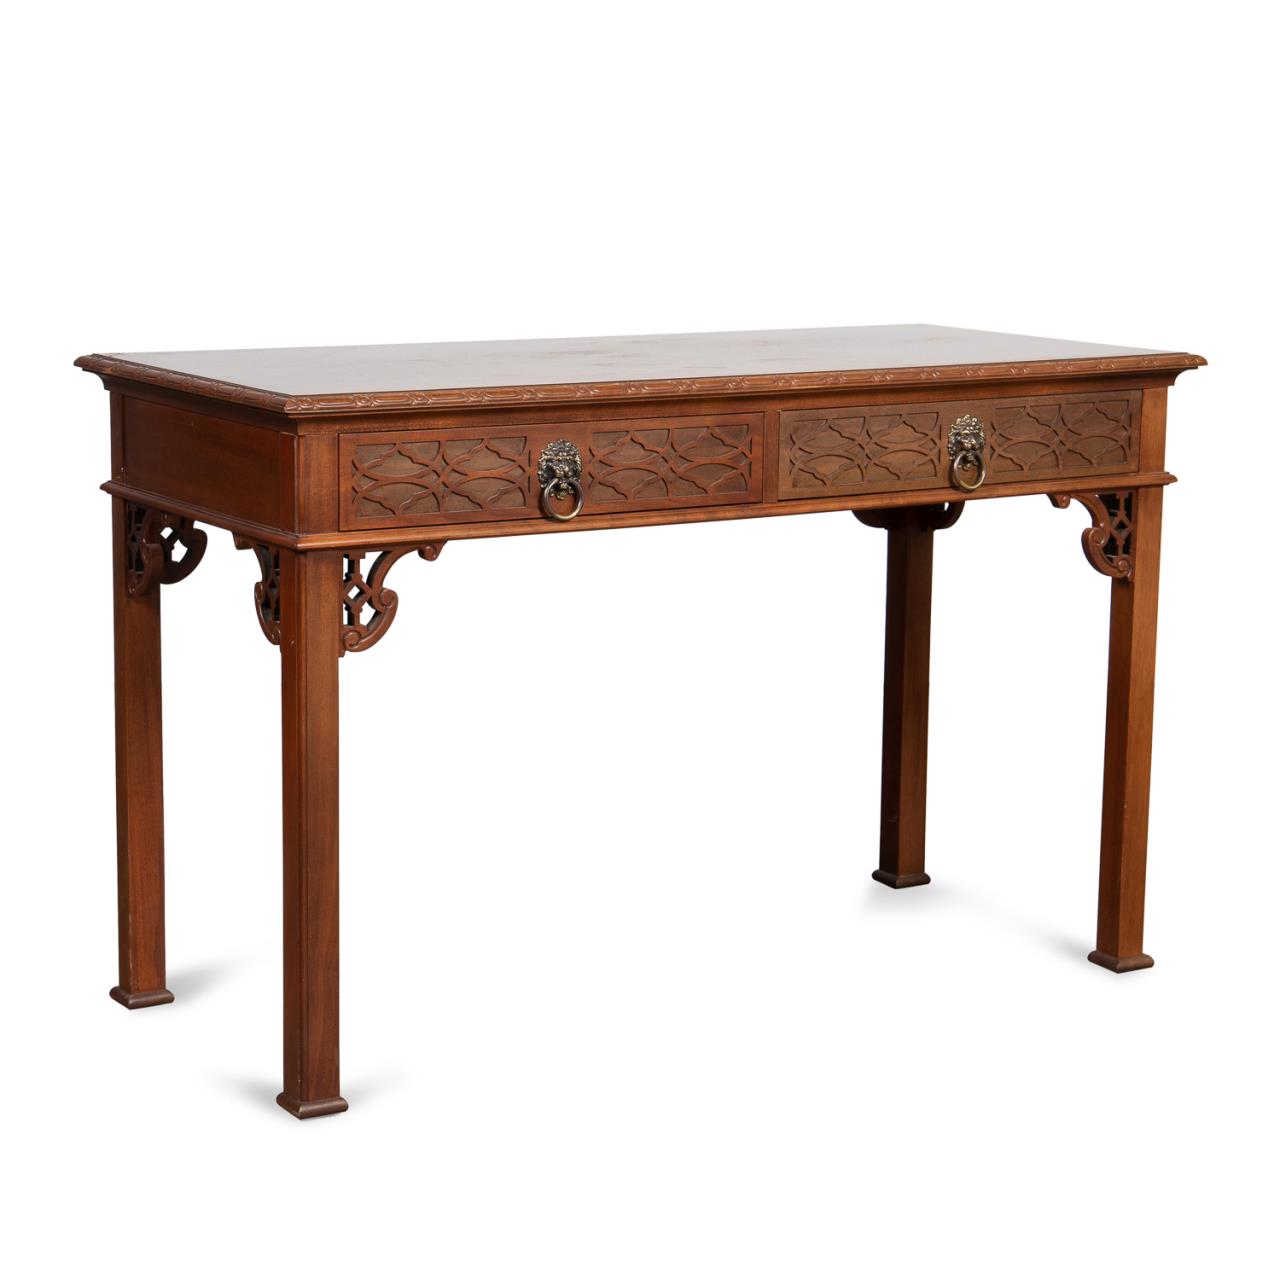 BAKER CHINESE CHIPPENDALE MAHOGANY 35816d